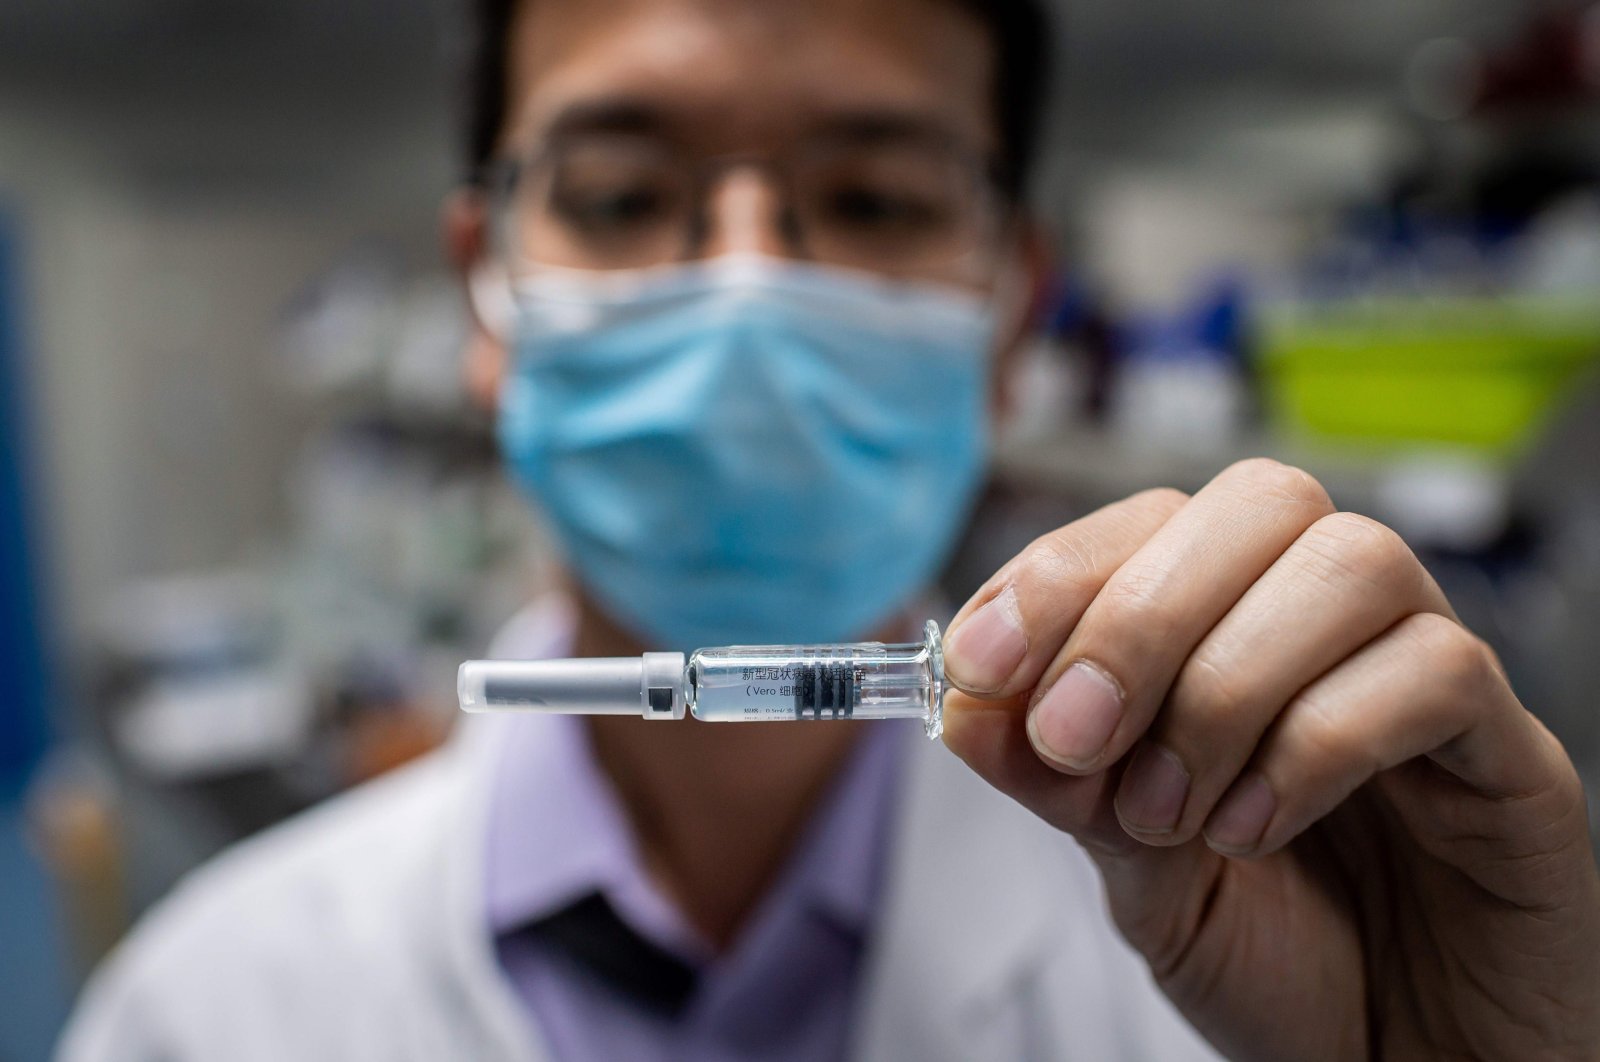 An engineer shows an experimental vaccine for COVID-19 that was tested at the Quality Control Laboratory at the Sinovac Biotech facilities, Beijing. Apr. 29, 2020. (AFP Photo)